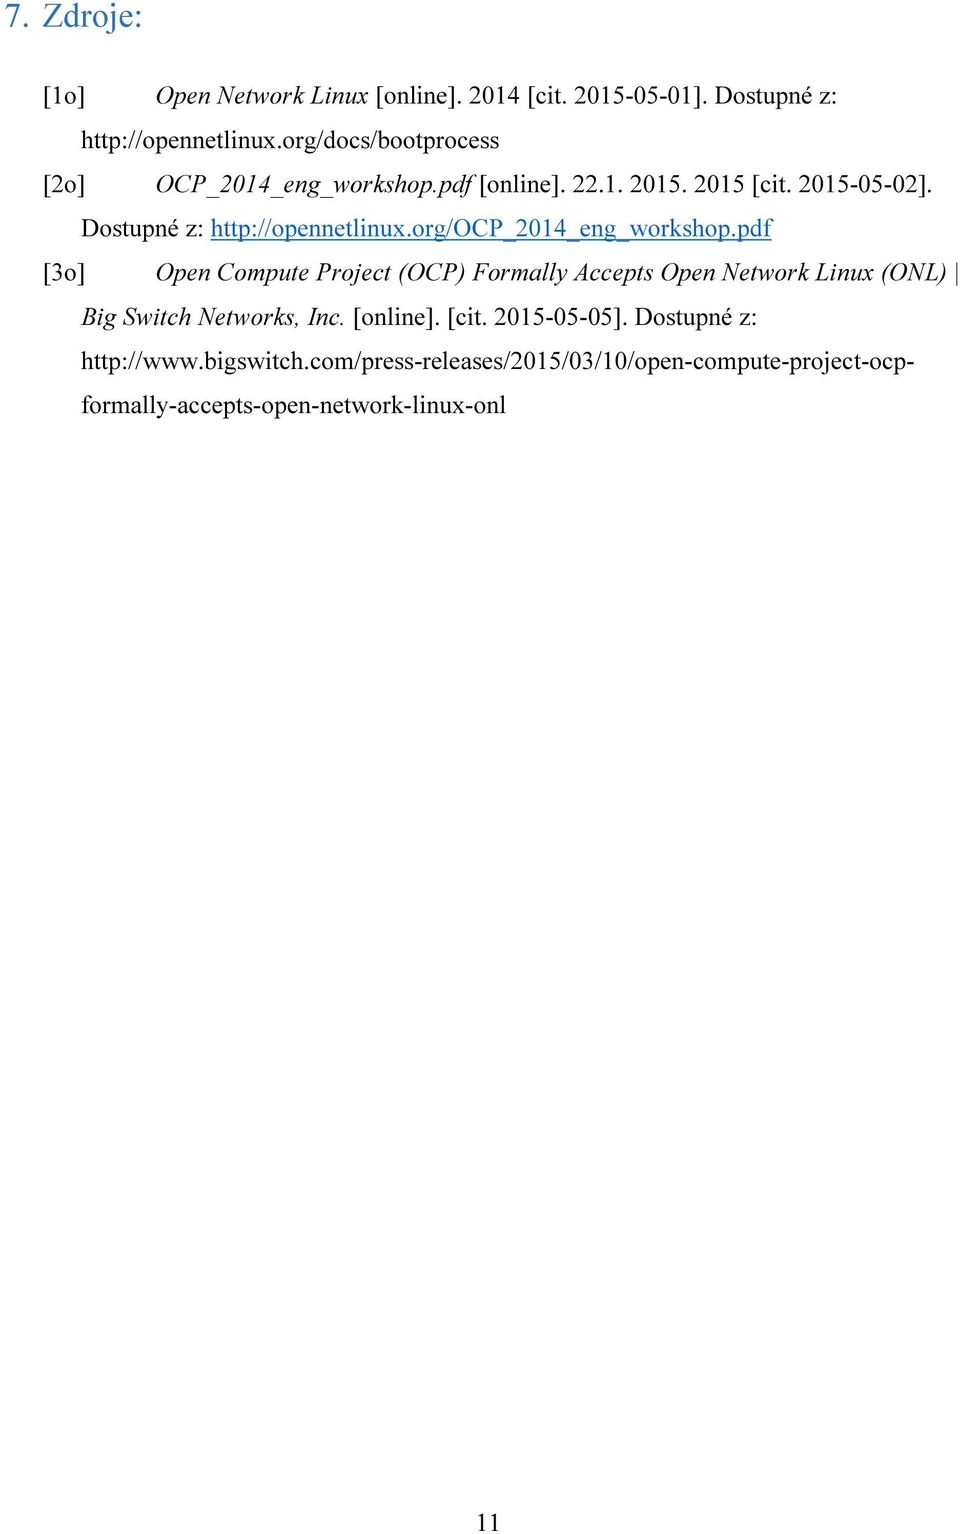 org/ocp_2014_eng_workshop.pdf [3o] Open Compute Project (OCP) Formally Accepts Open Network Linux (ONL) Big Switch Networks, Inc.